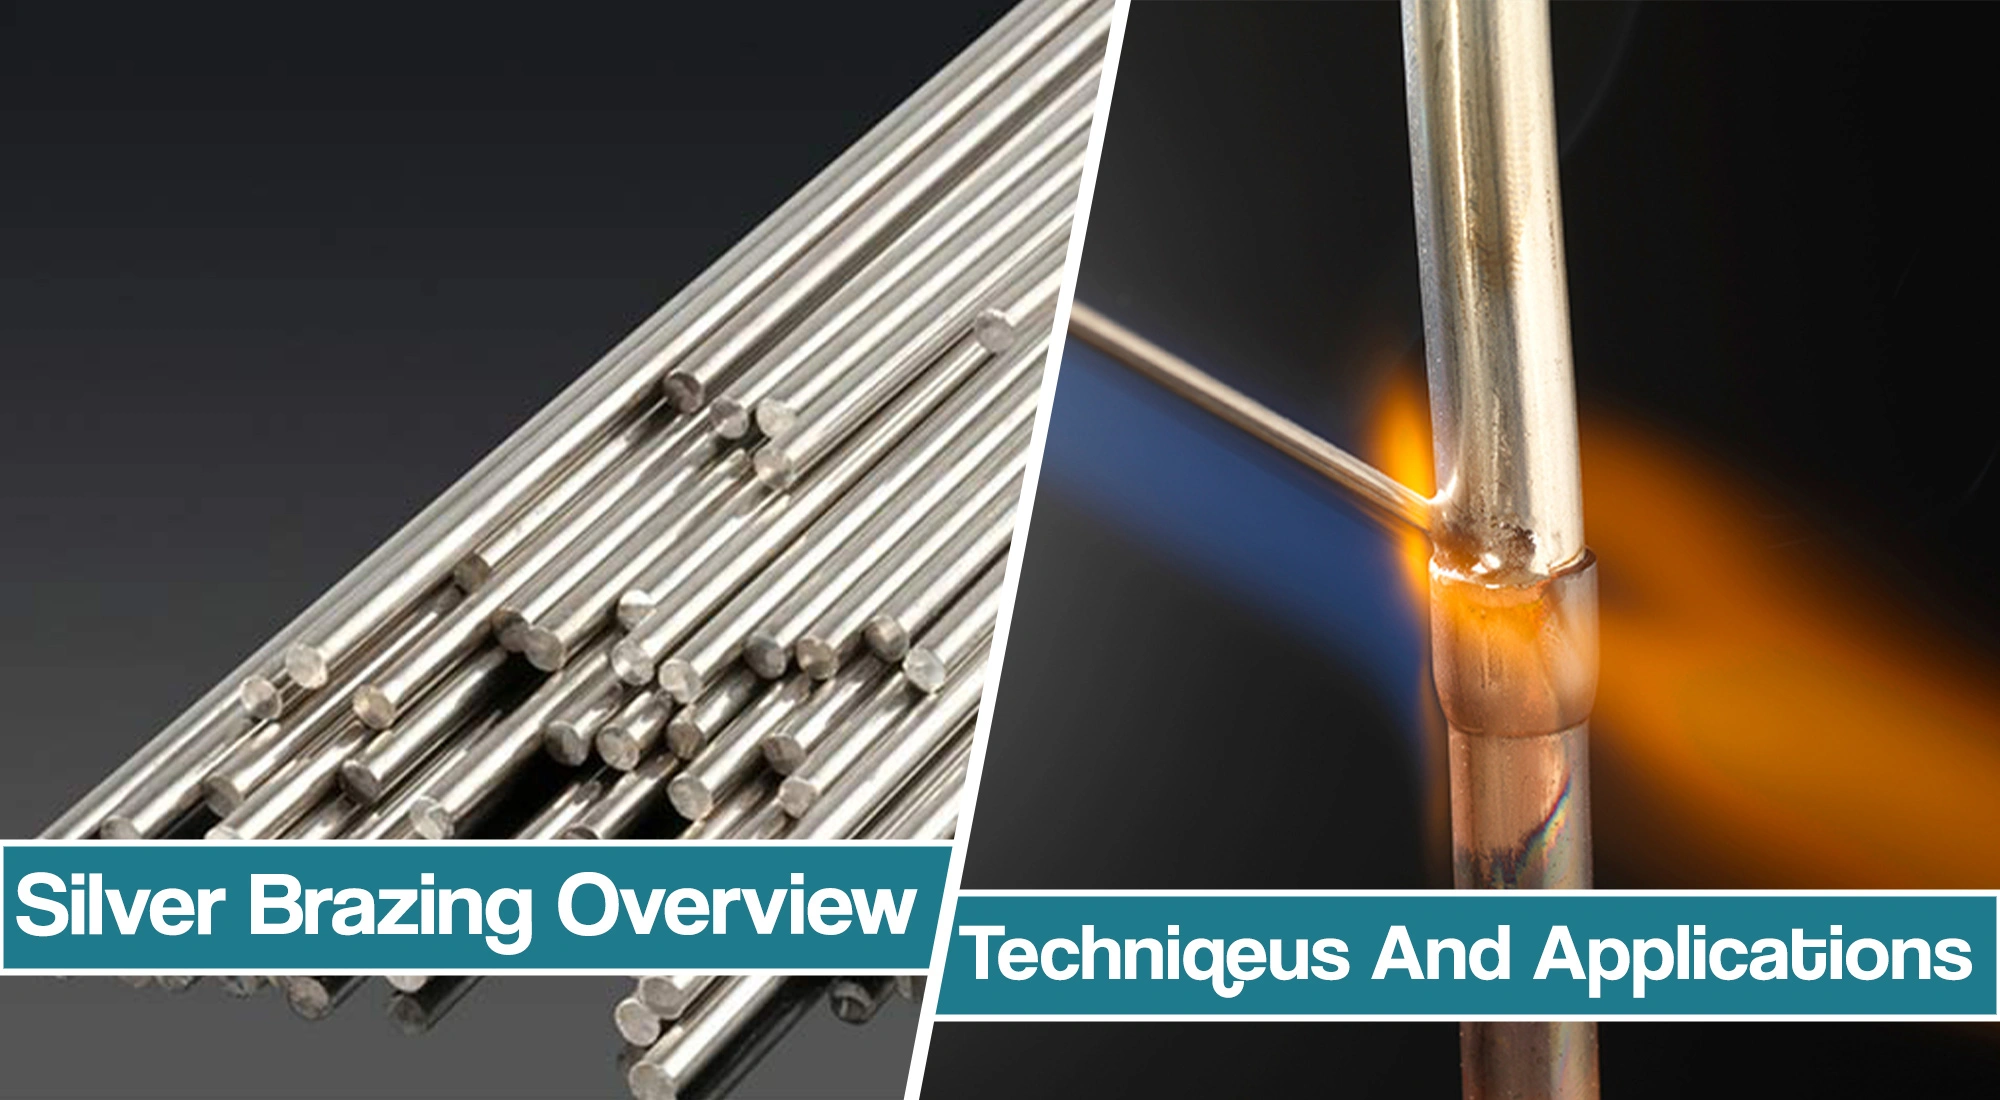 Silver brazing Overview – How-To Guide, Brazing Tips, Techniques, And Applications